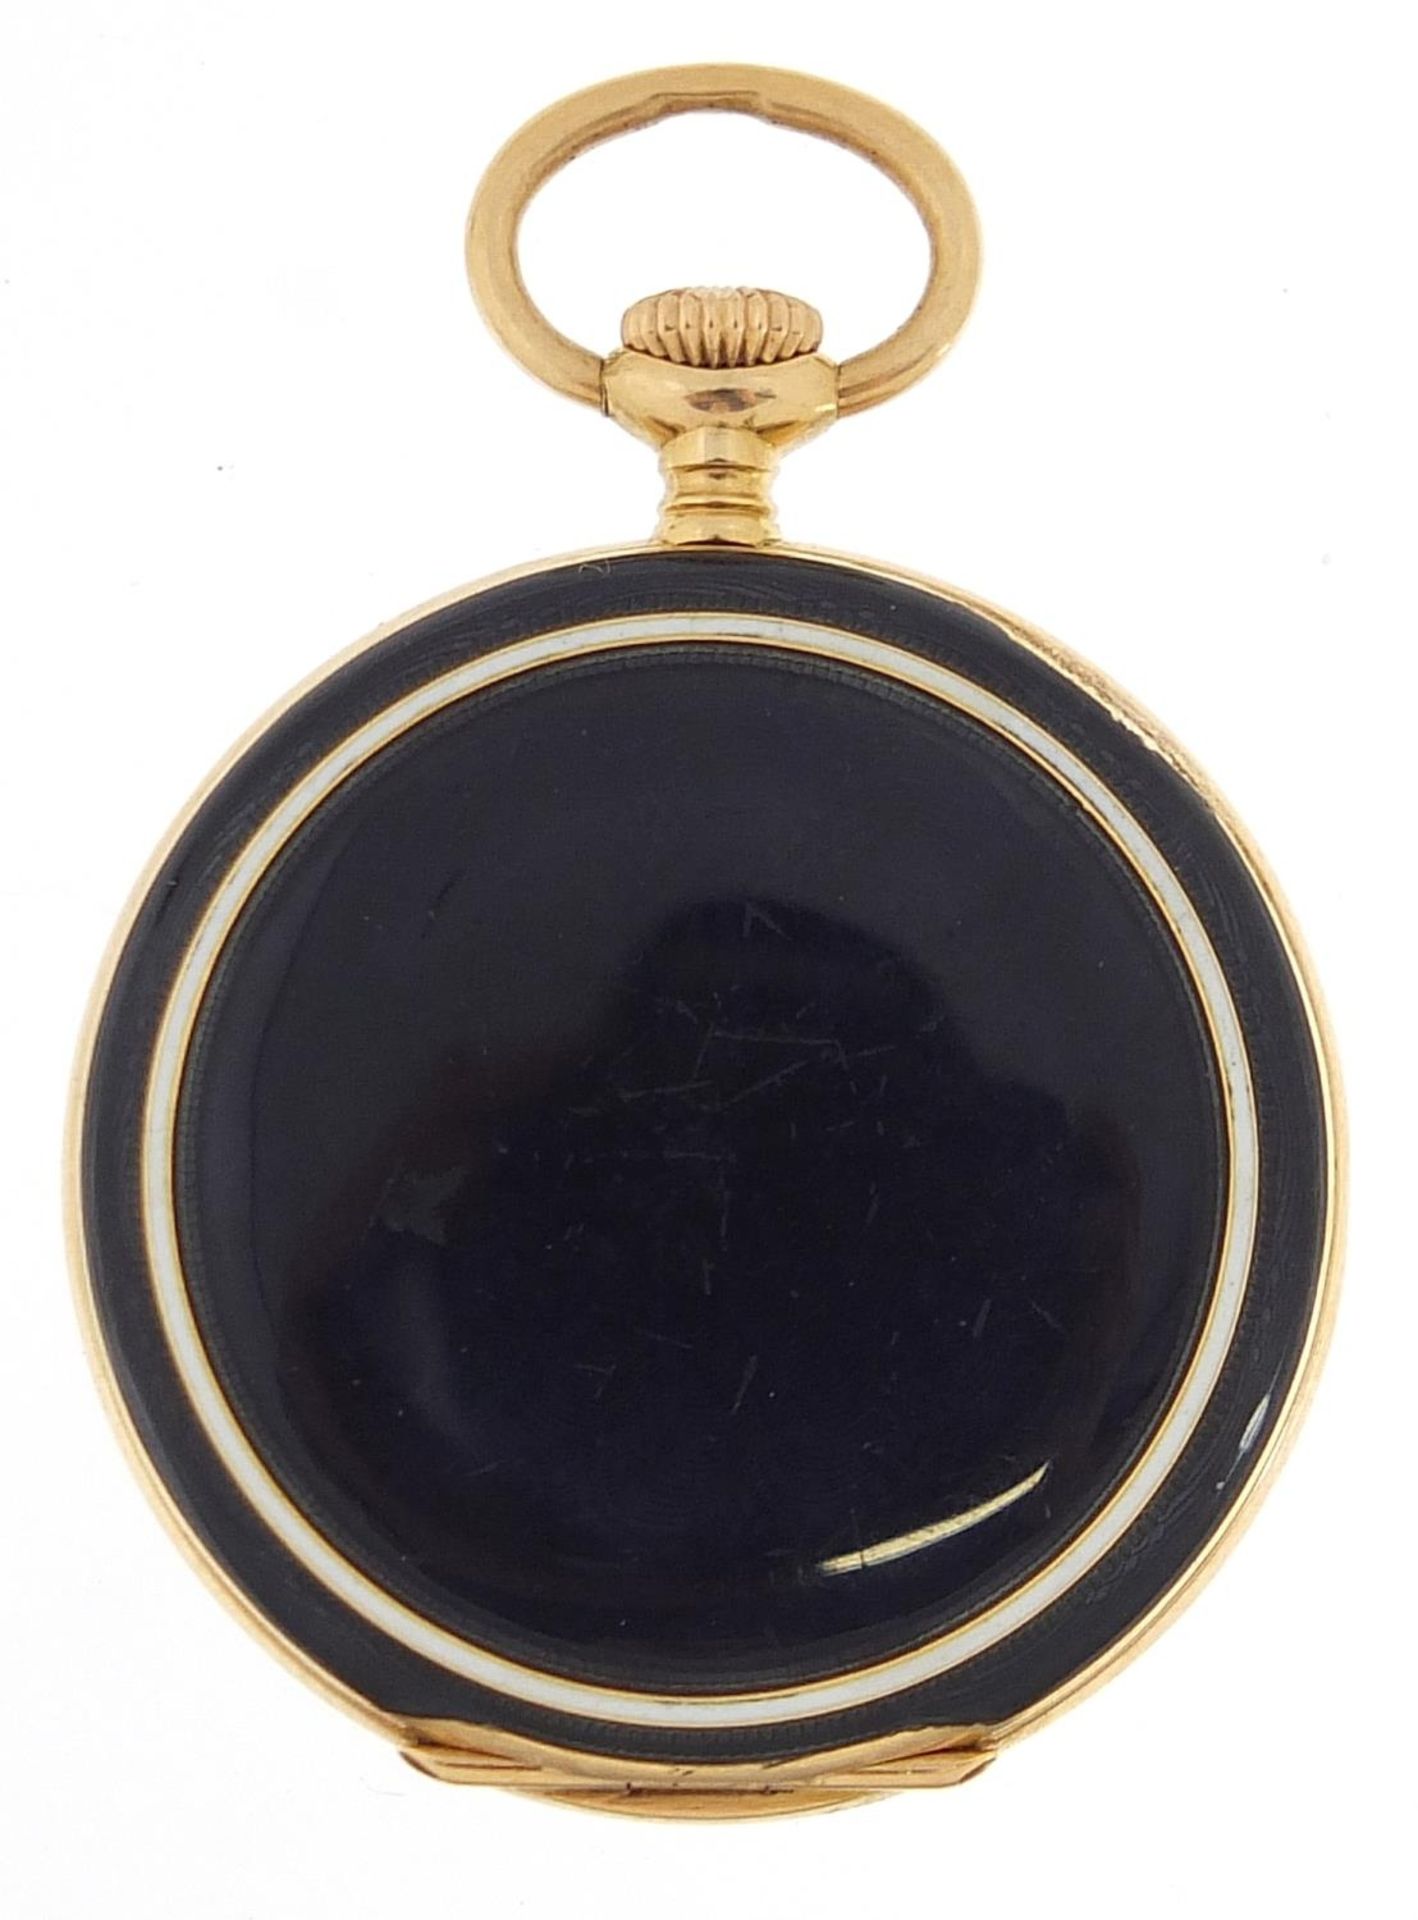 Ladies 9ct gold purple guilloche enamelled open face pocket watch, 27mm in diameter, 17.0g - Image 2 of 4